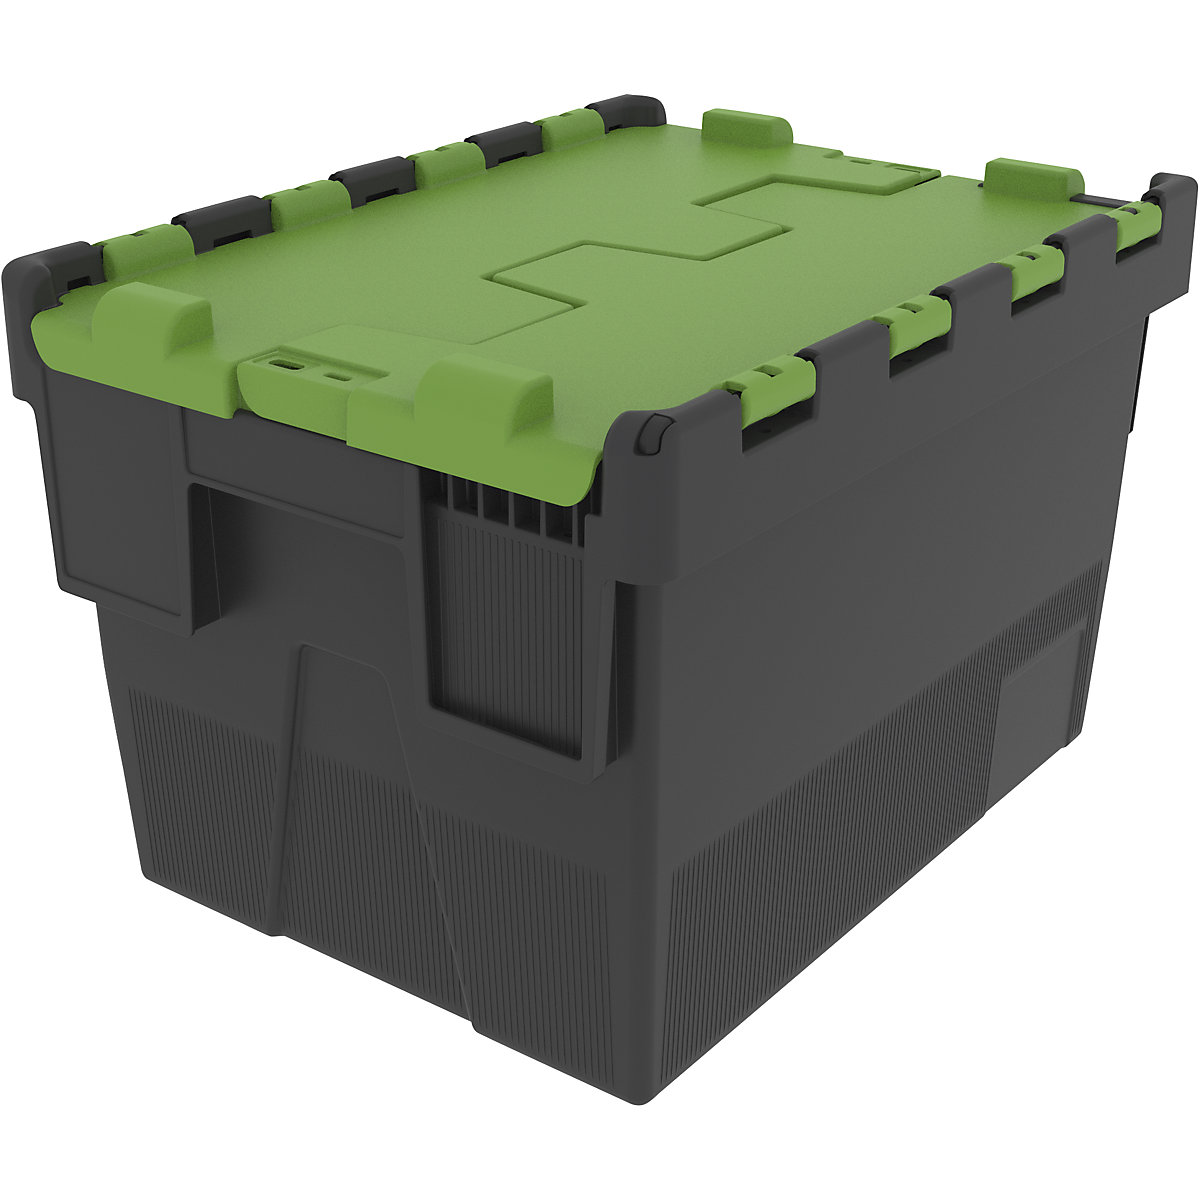 Reusable stacking container, LxWxH 400 x 300 x 264 mm, black/green-5